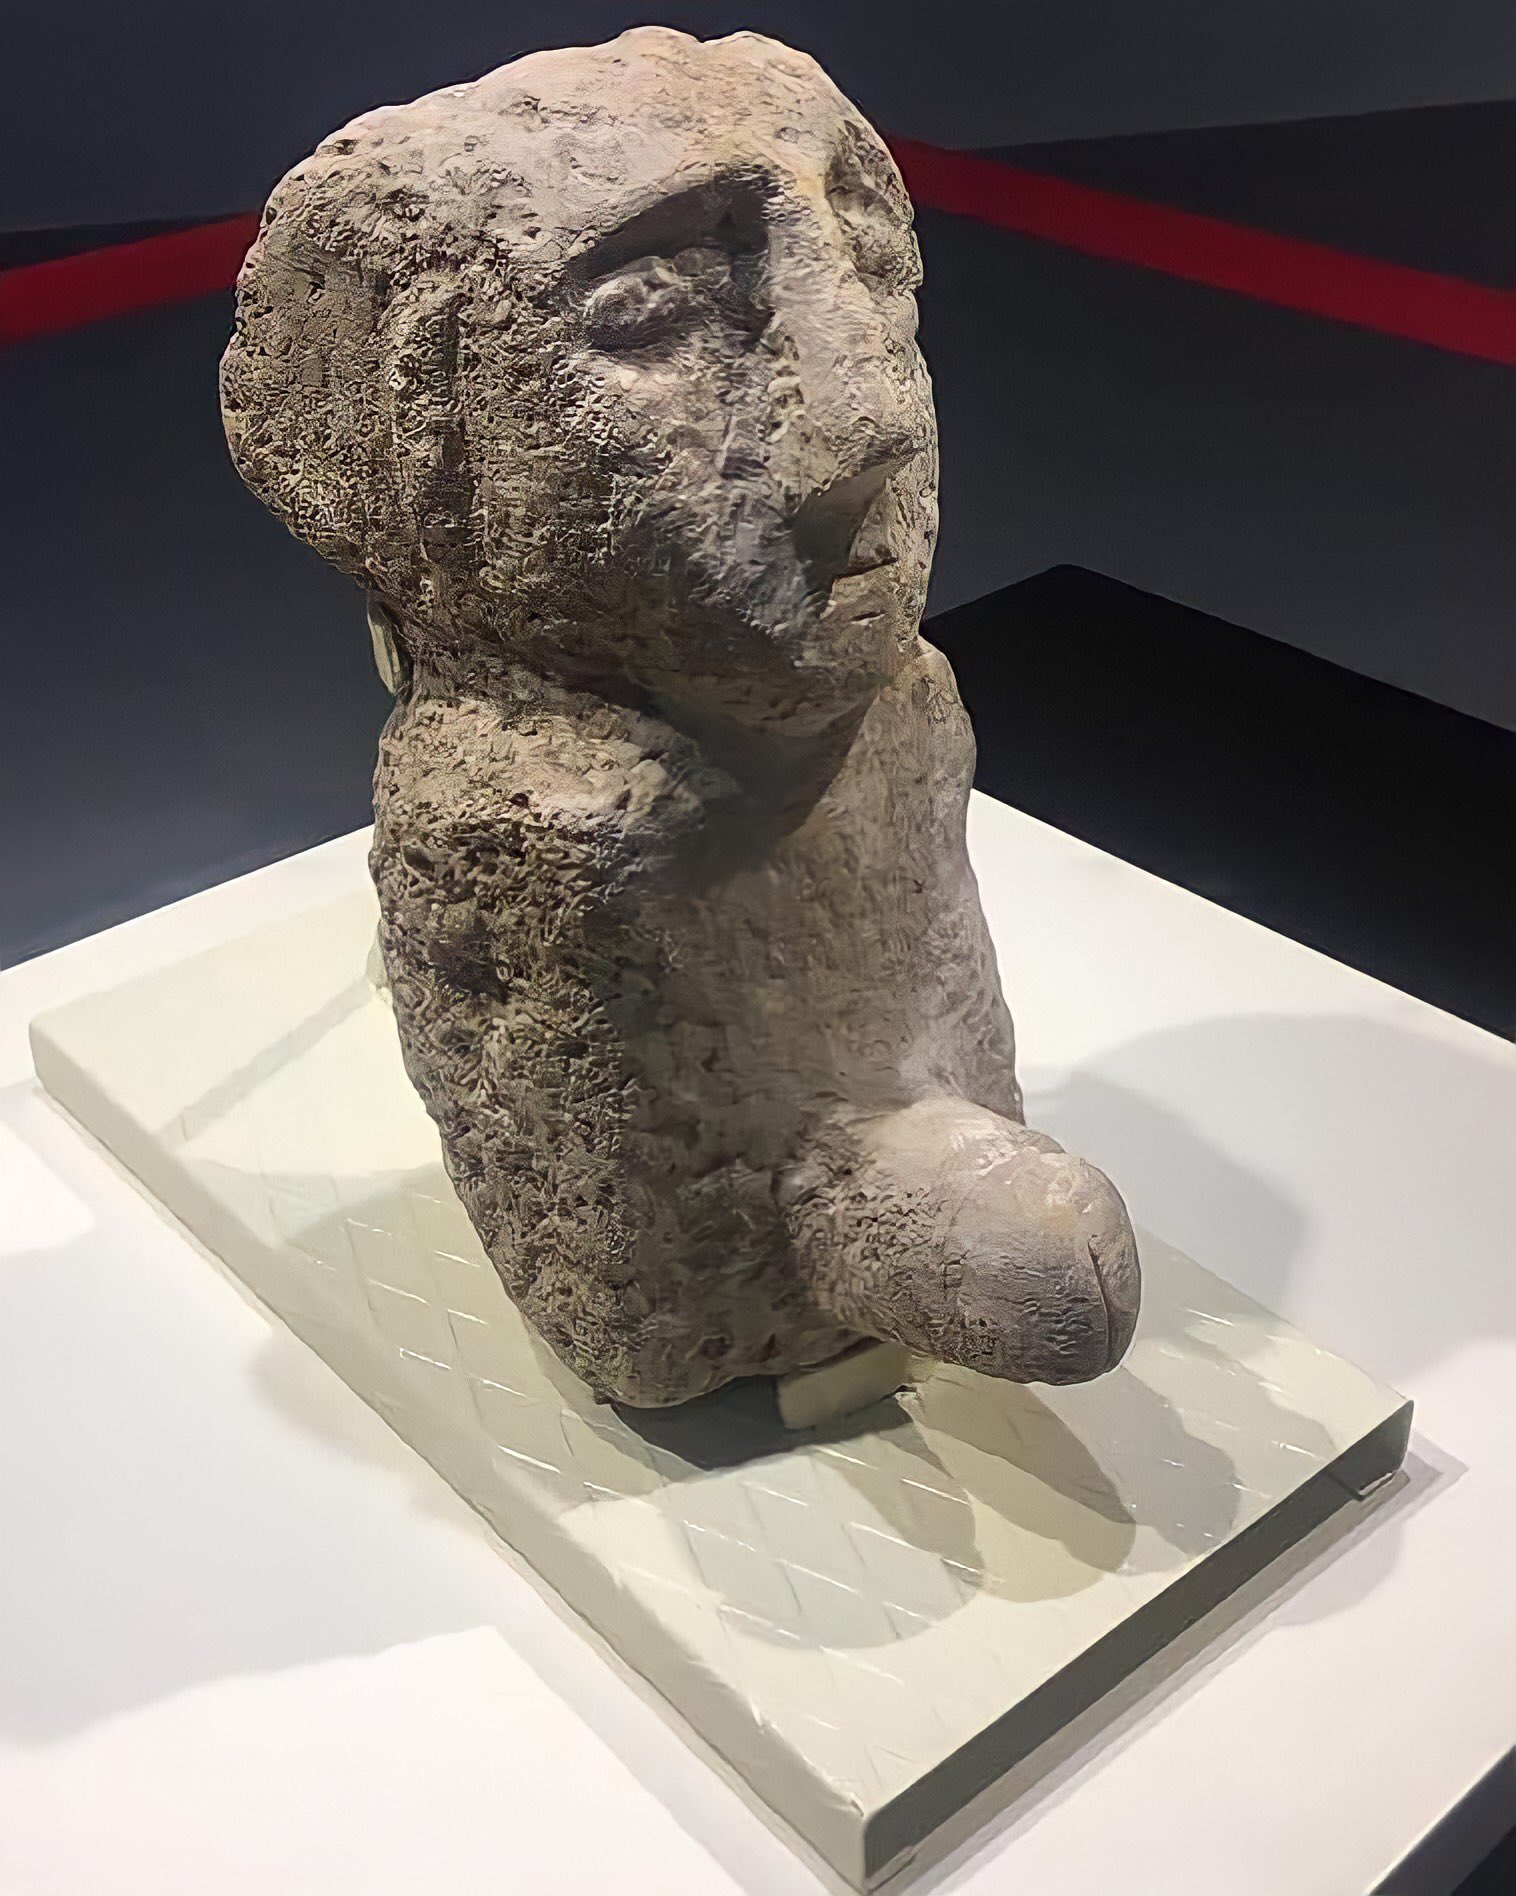 A stone sculpture of a man from the 12,000-year-old Göbekli Tepe in Turkey.jpg